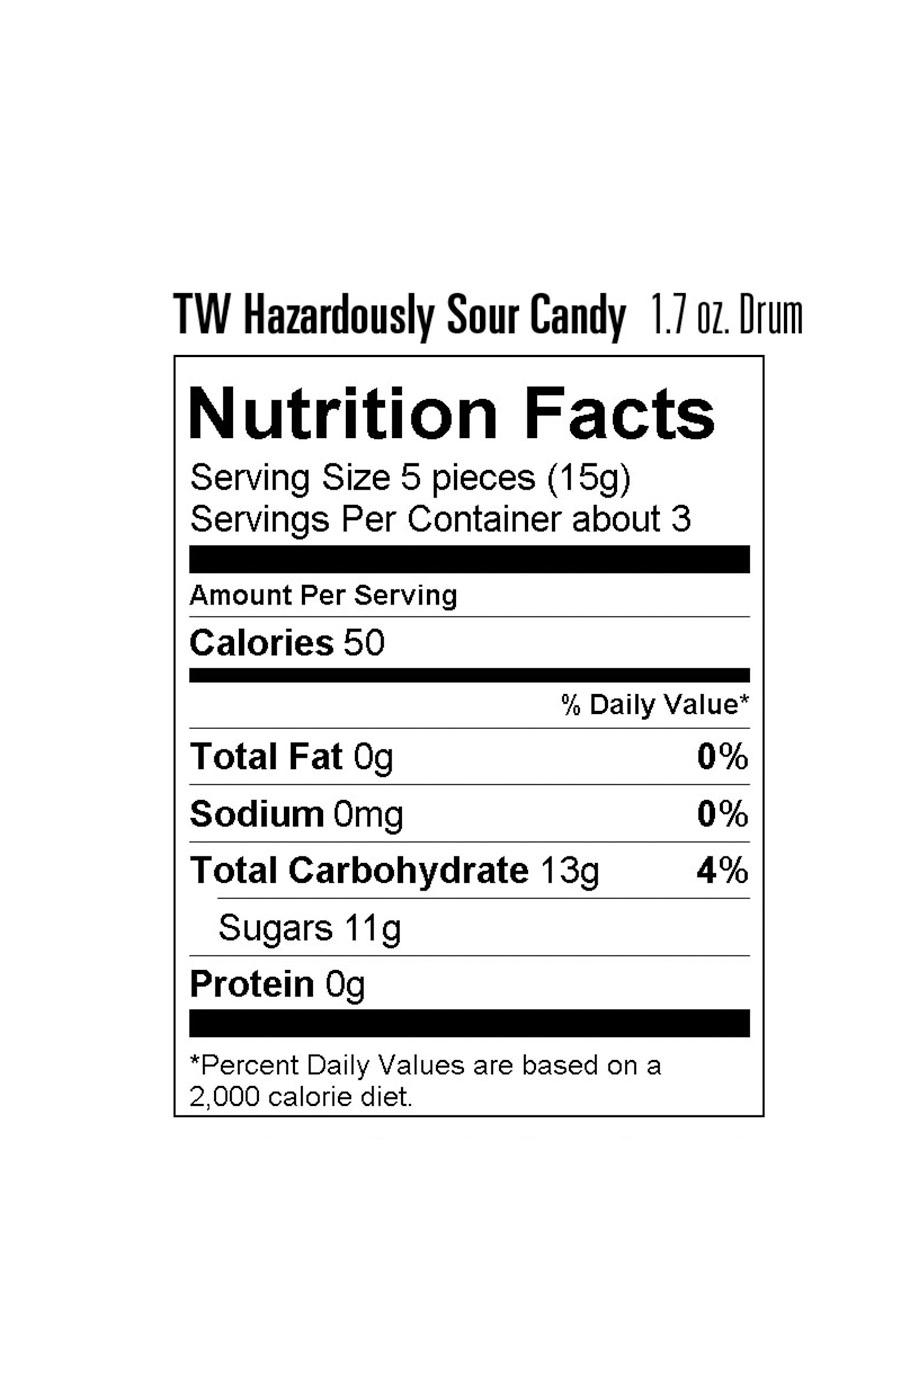 Toxic Waste Sour Candy Yellow Drum - Shop Candy at H-E-B